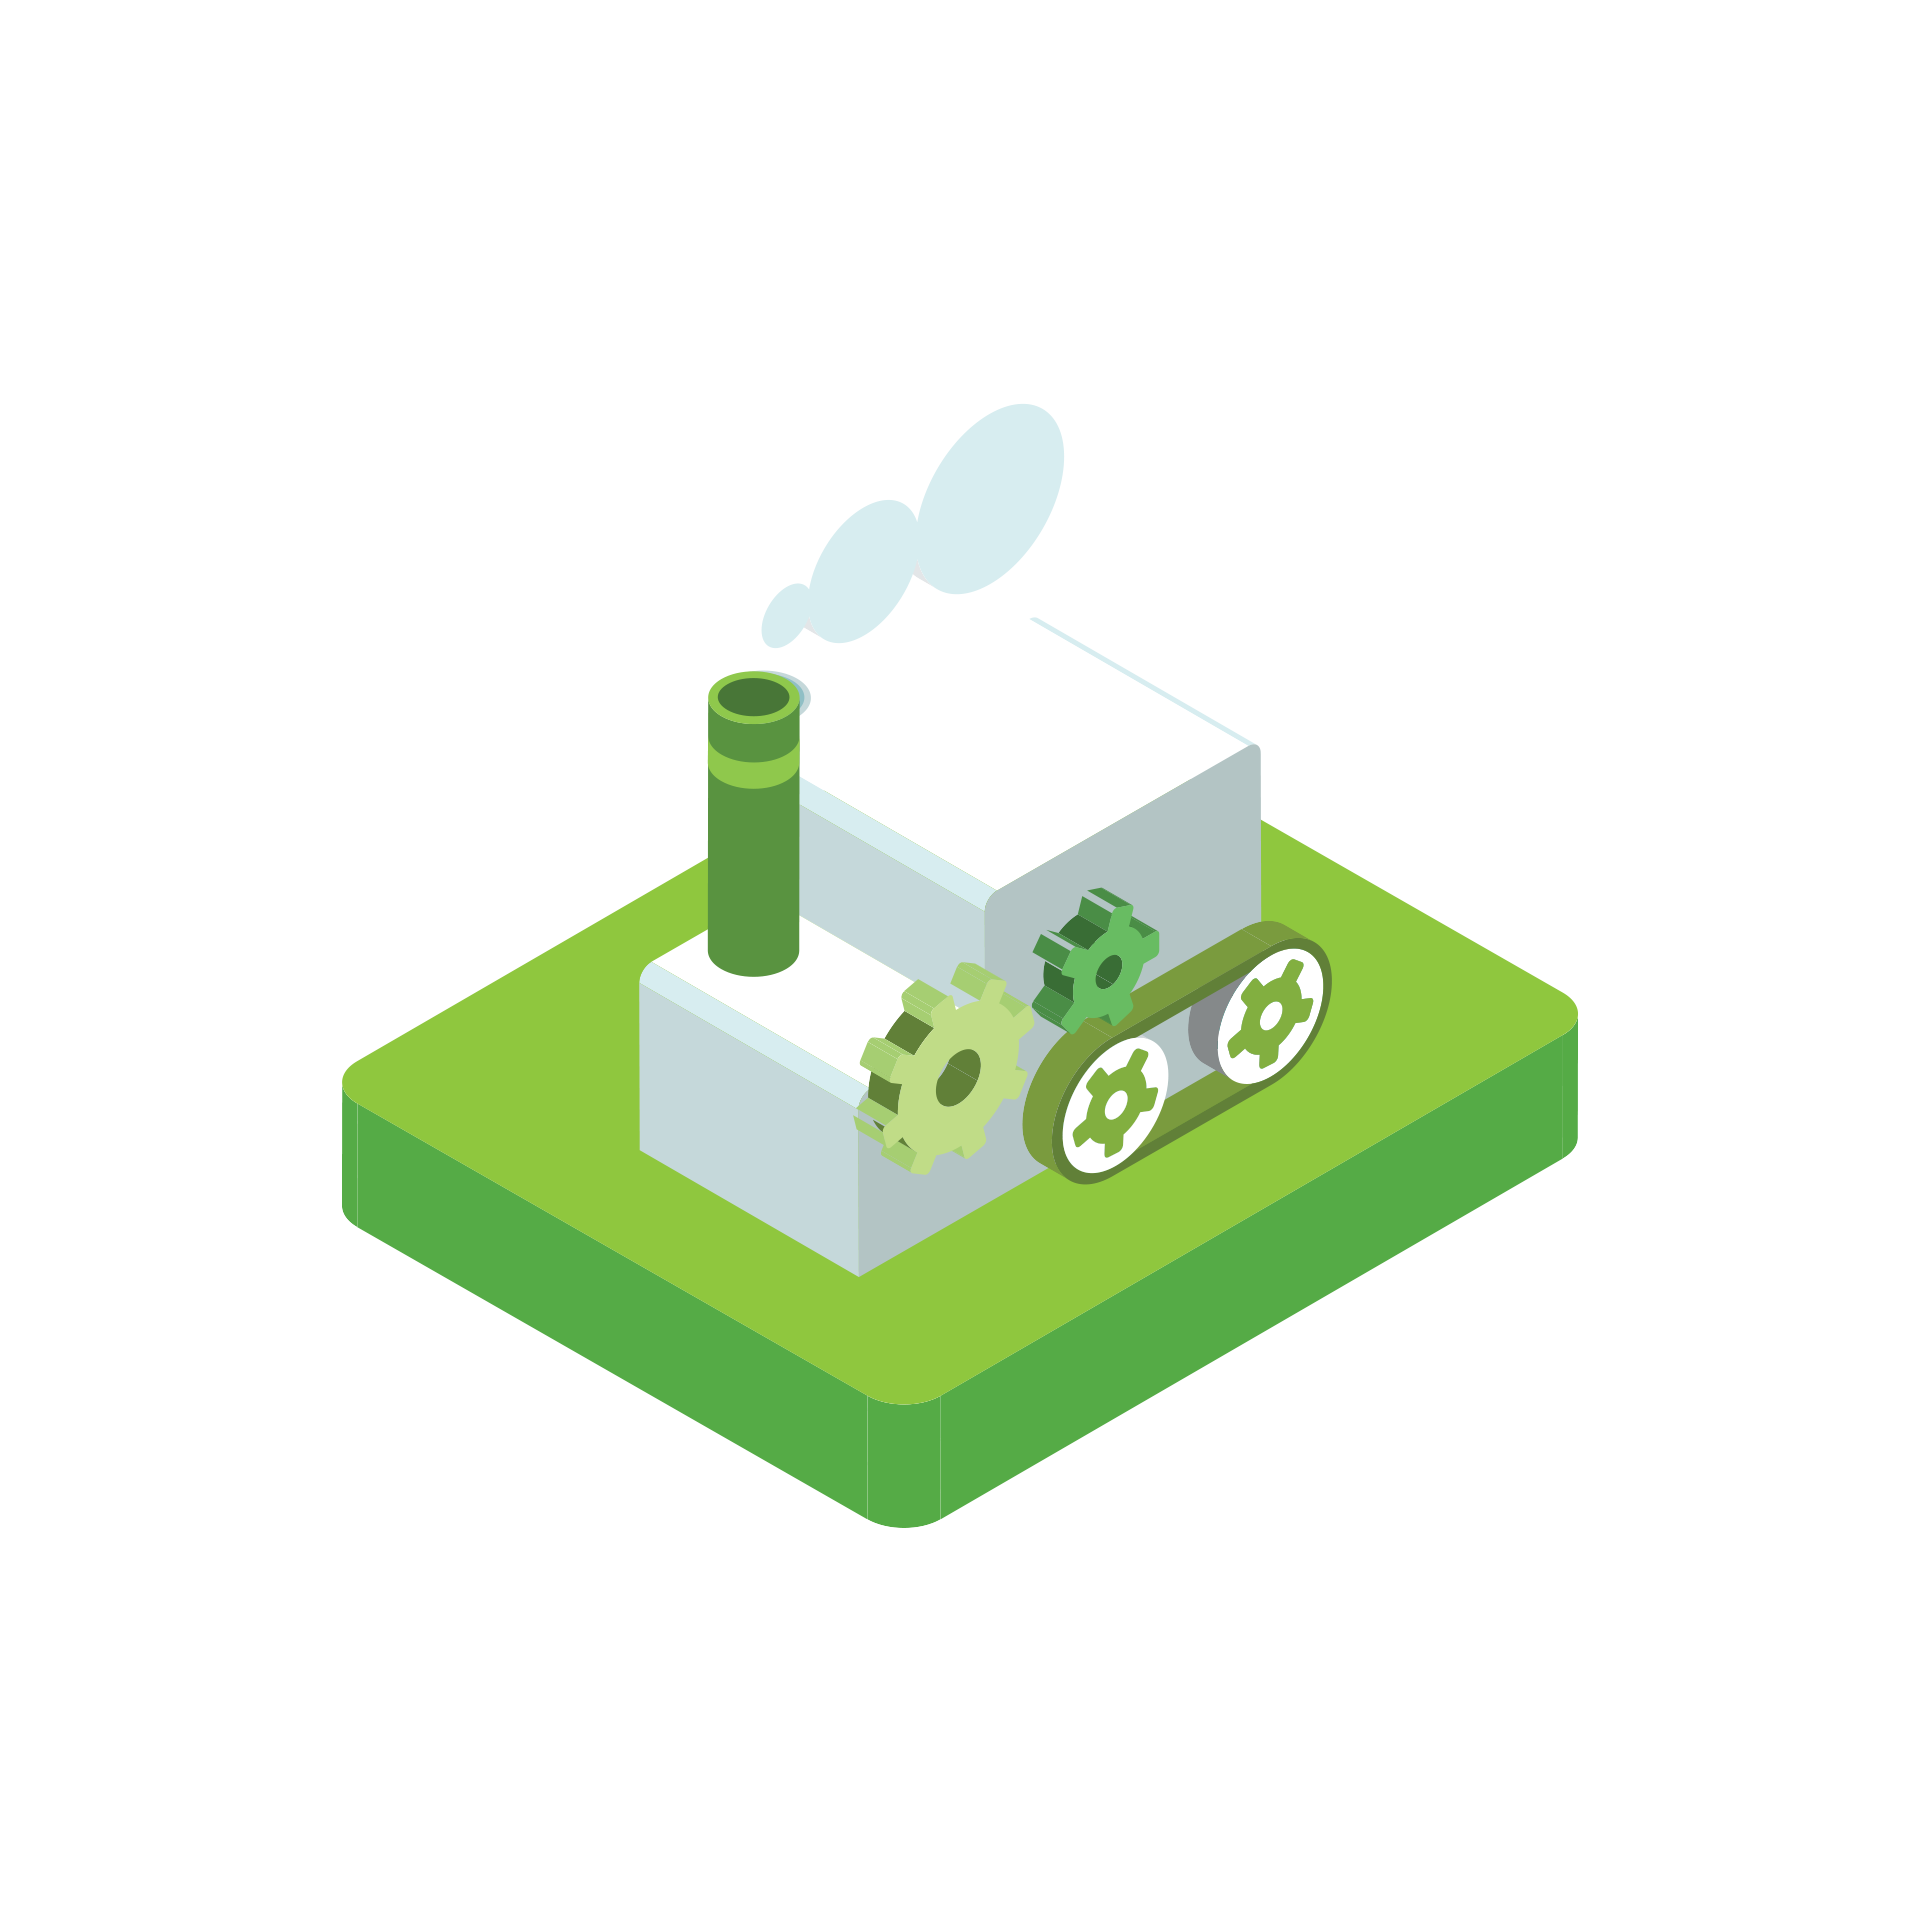 Technology clipart green technology. Sigma energy storage ht